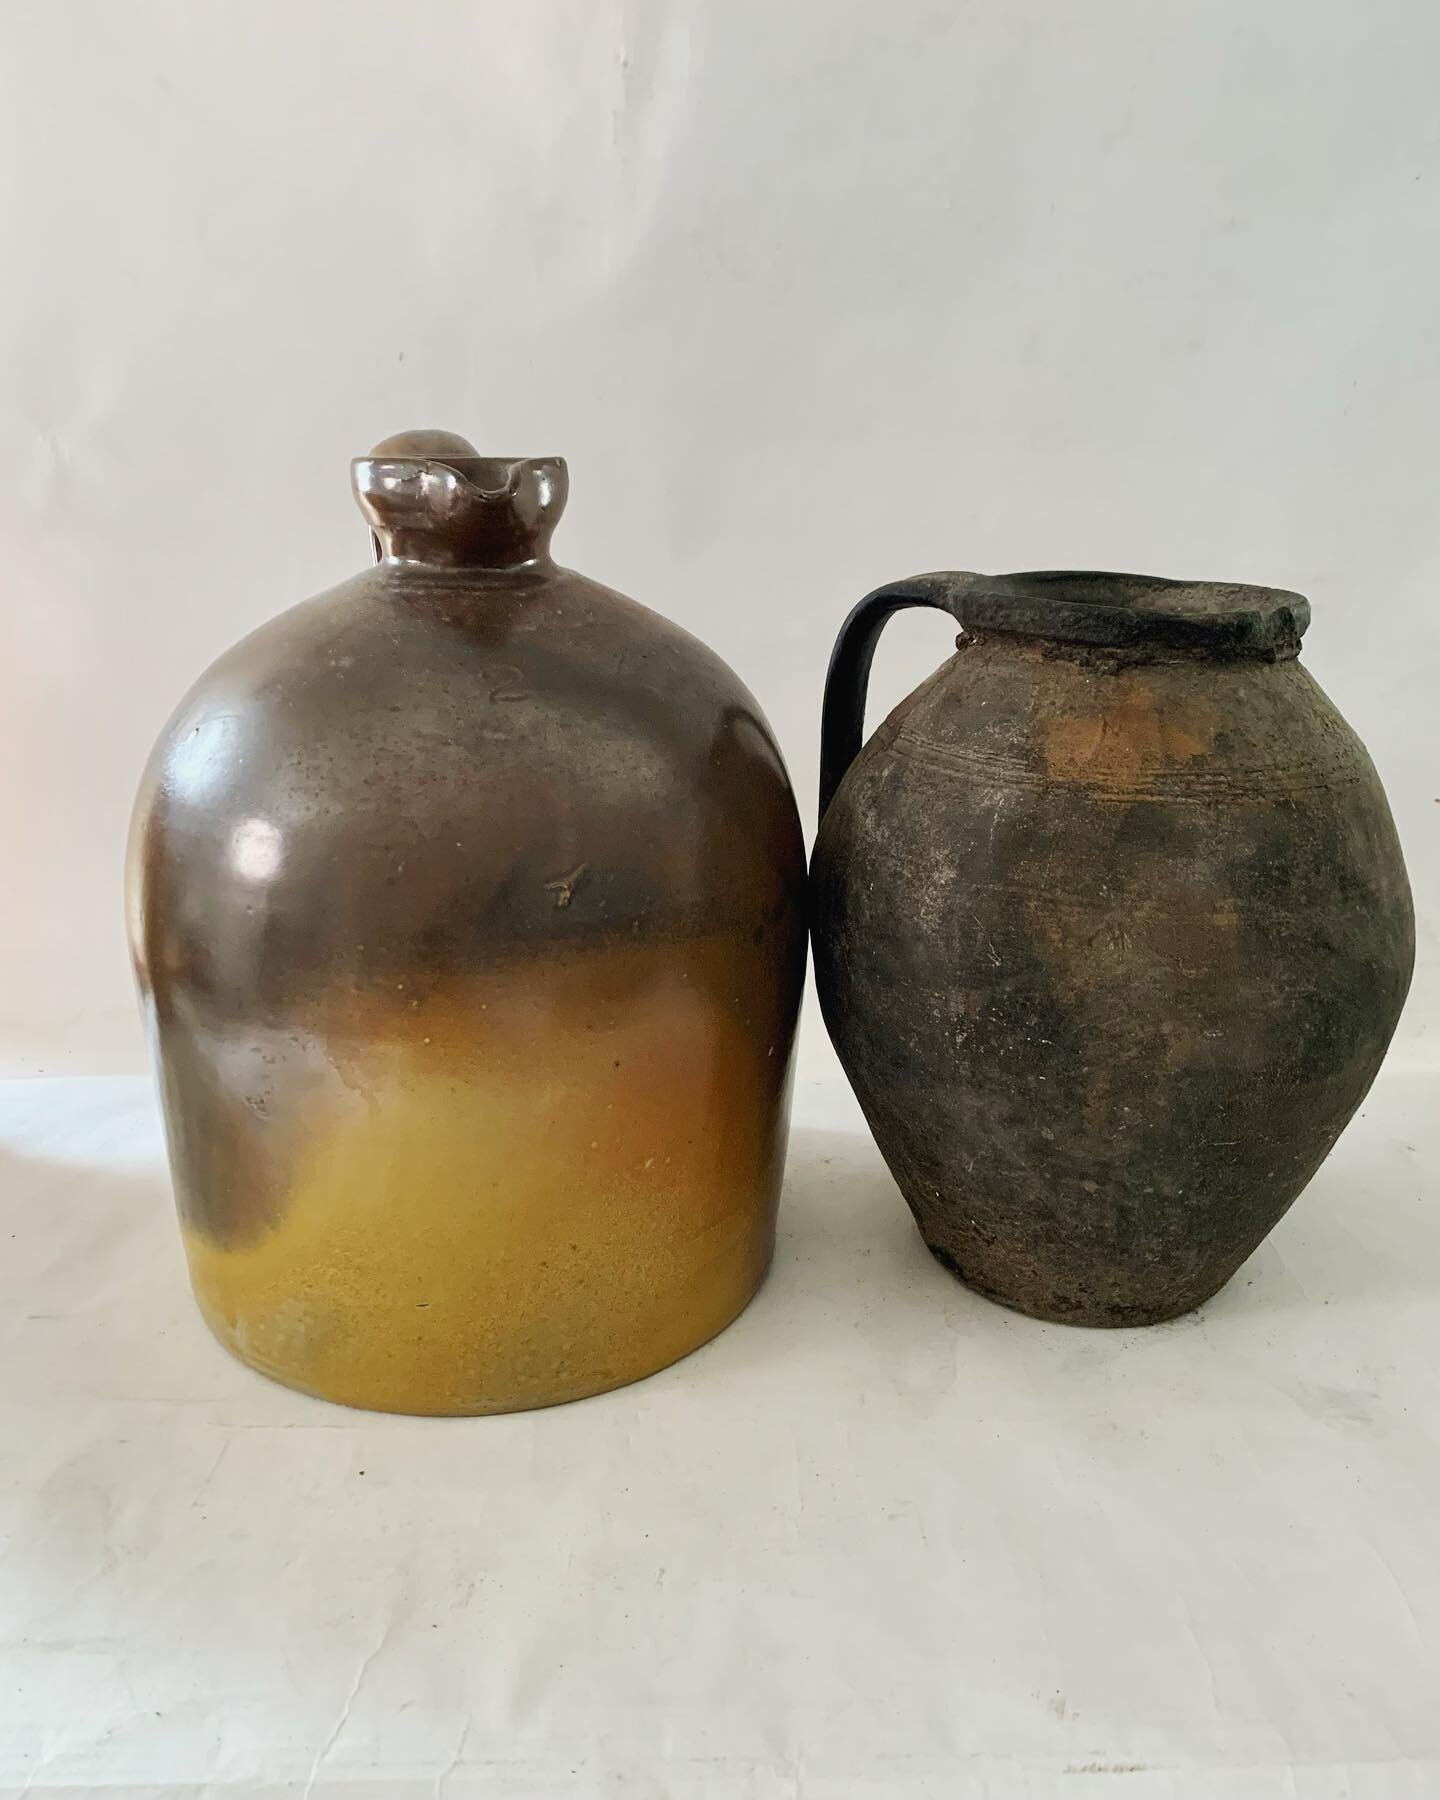 A couple of good size pottery pieces, a two tone 19th c. pottery jug crock 13&rdquo;H $78.00 and a primitive black pottery vessel 11.5&rdquo;H $145.00 #interiors #kitchendesign #modernfarmhouse #vintagefineobjects #dmforinq